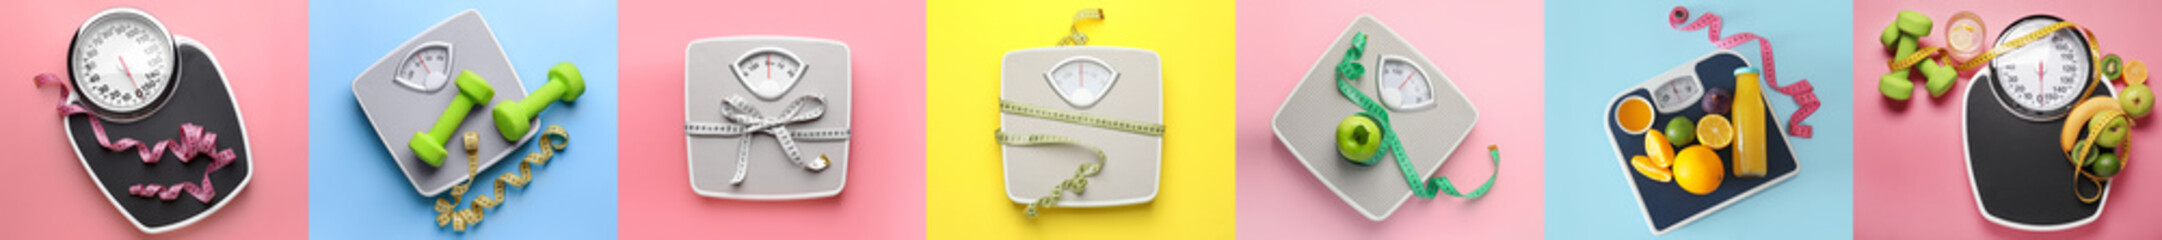 Collage with weight scales, measuring tapes, healthy food and dumbbells on color background....